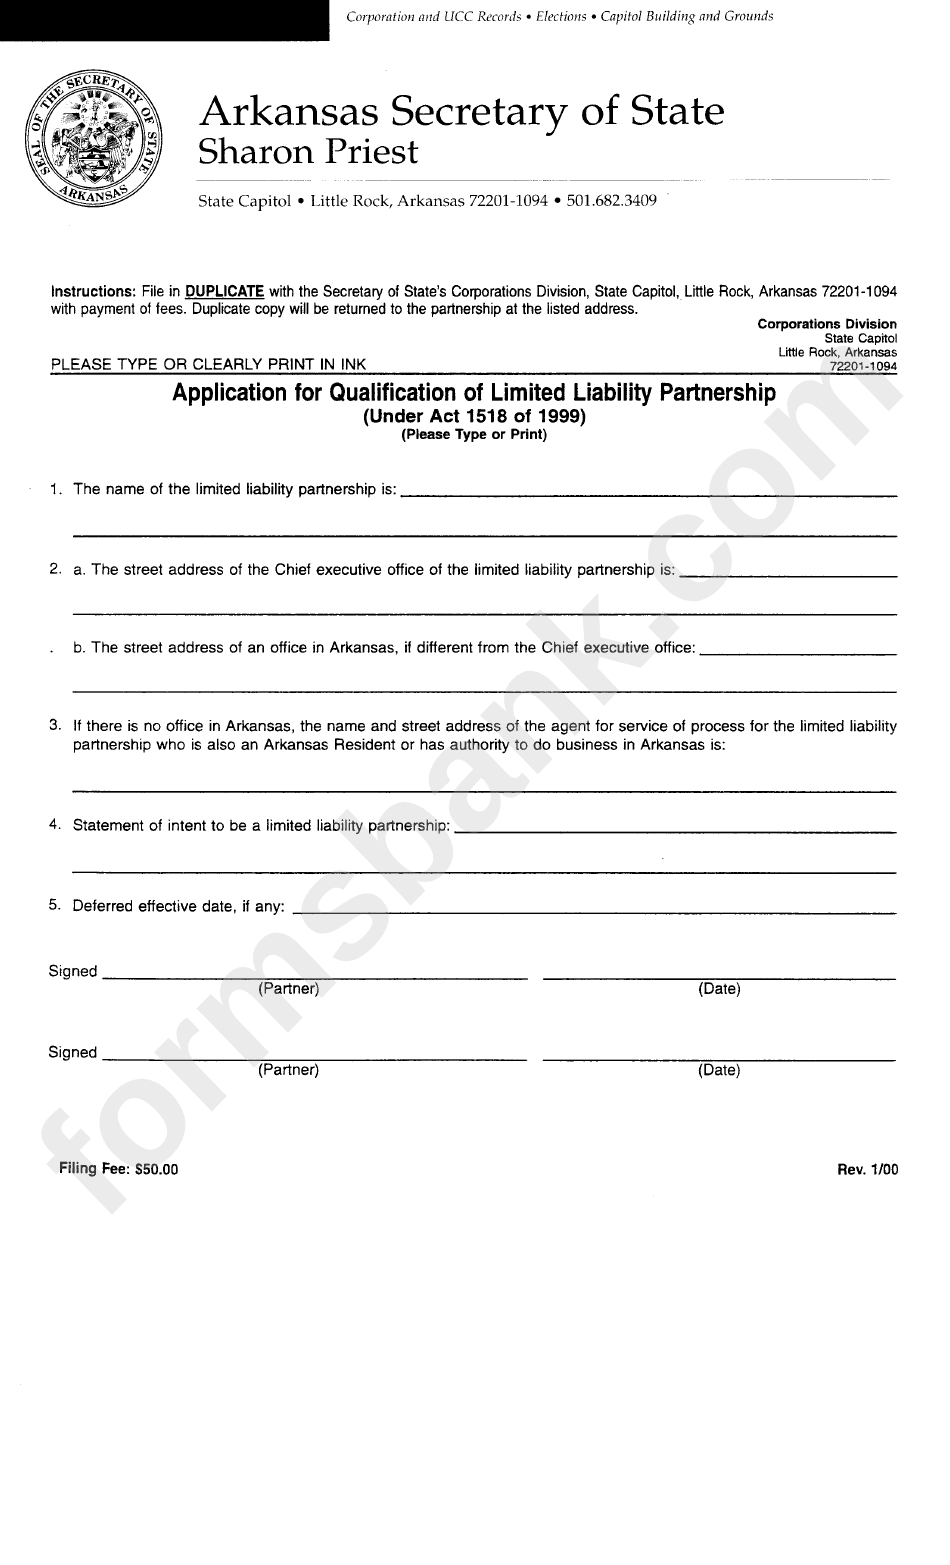 Application For Qualification Of Limited Liability Partnership Form Arkansas - Secretary Of State